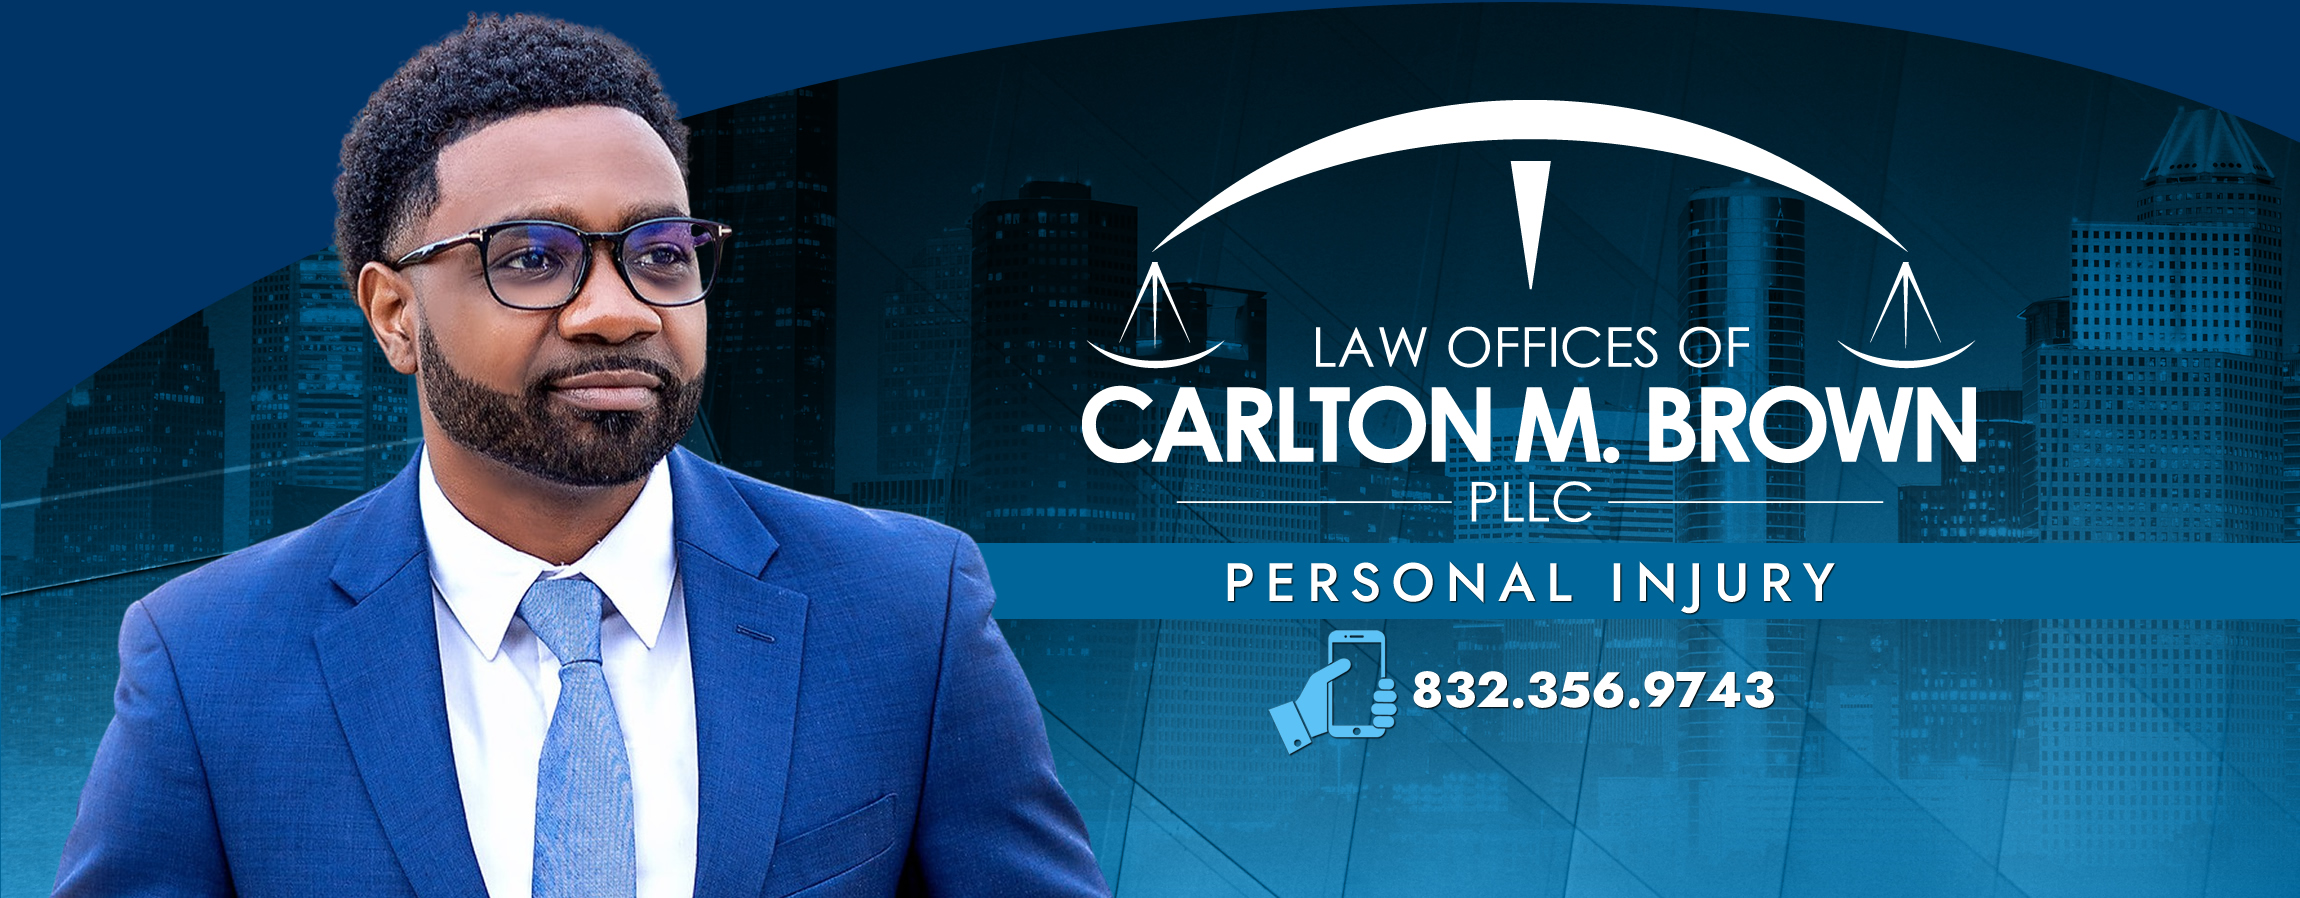 Law Offices of Carlton M. Brown, PLLC